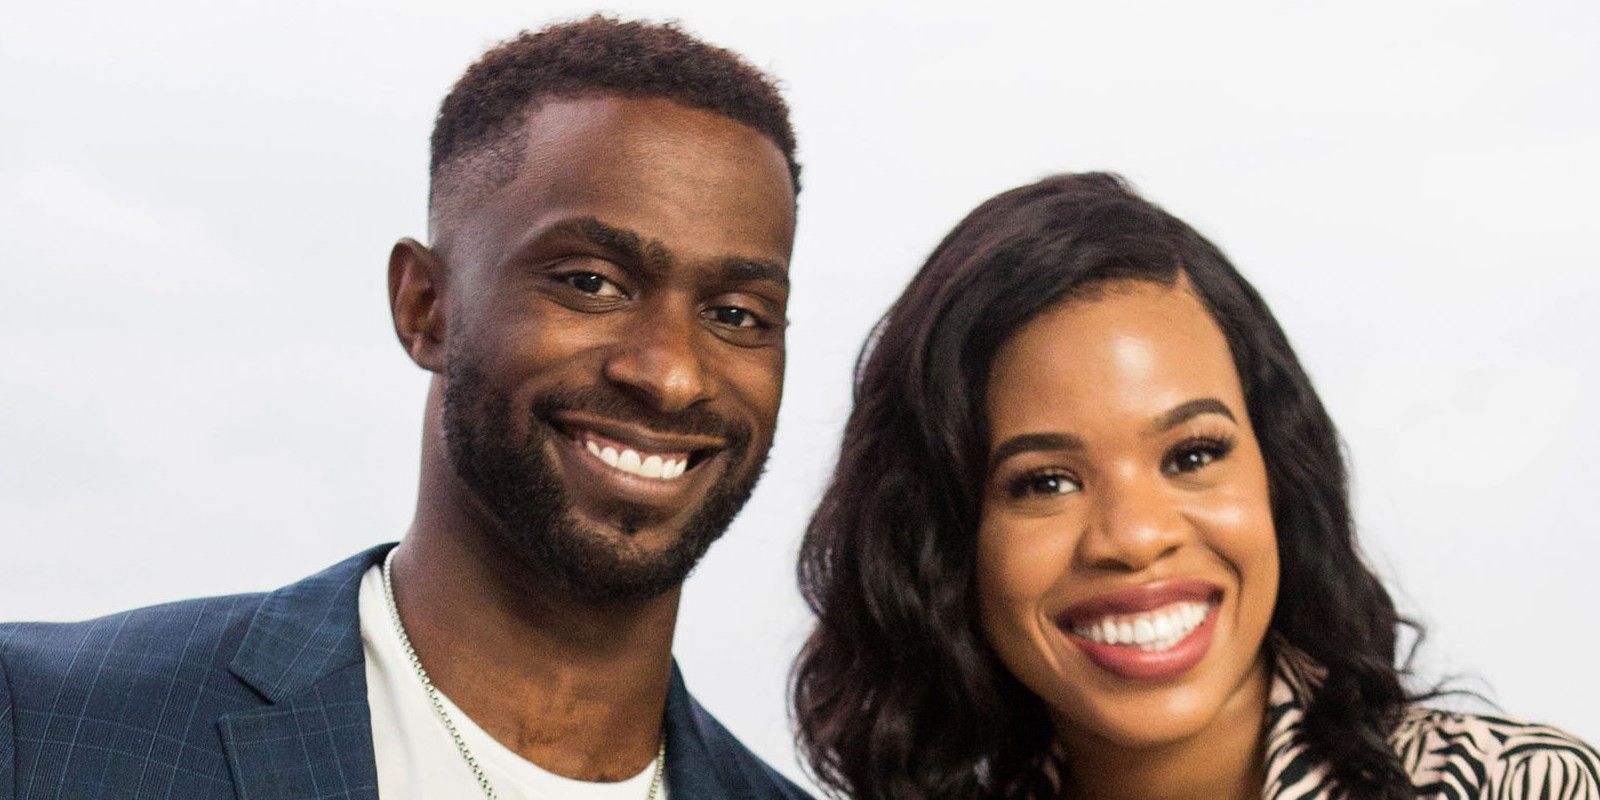 MAFS: Michaela Reveals She’s ‘Contractually Obligated’ to Stay Married